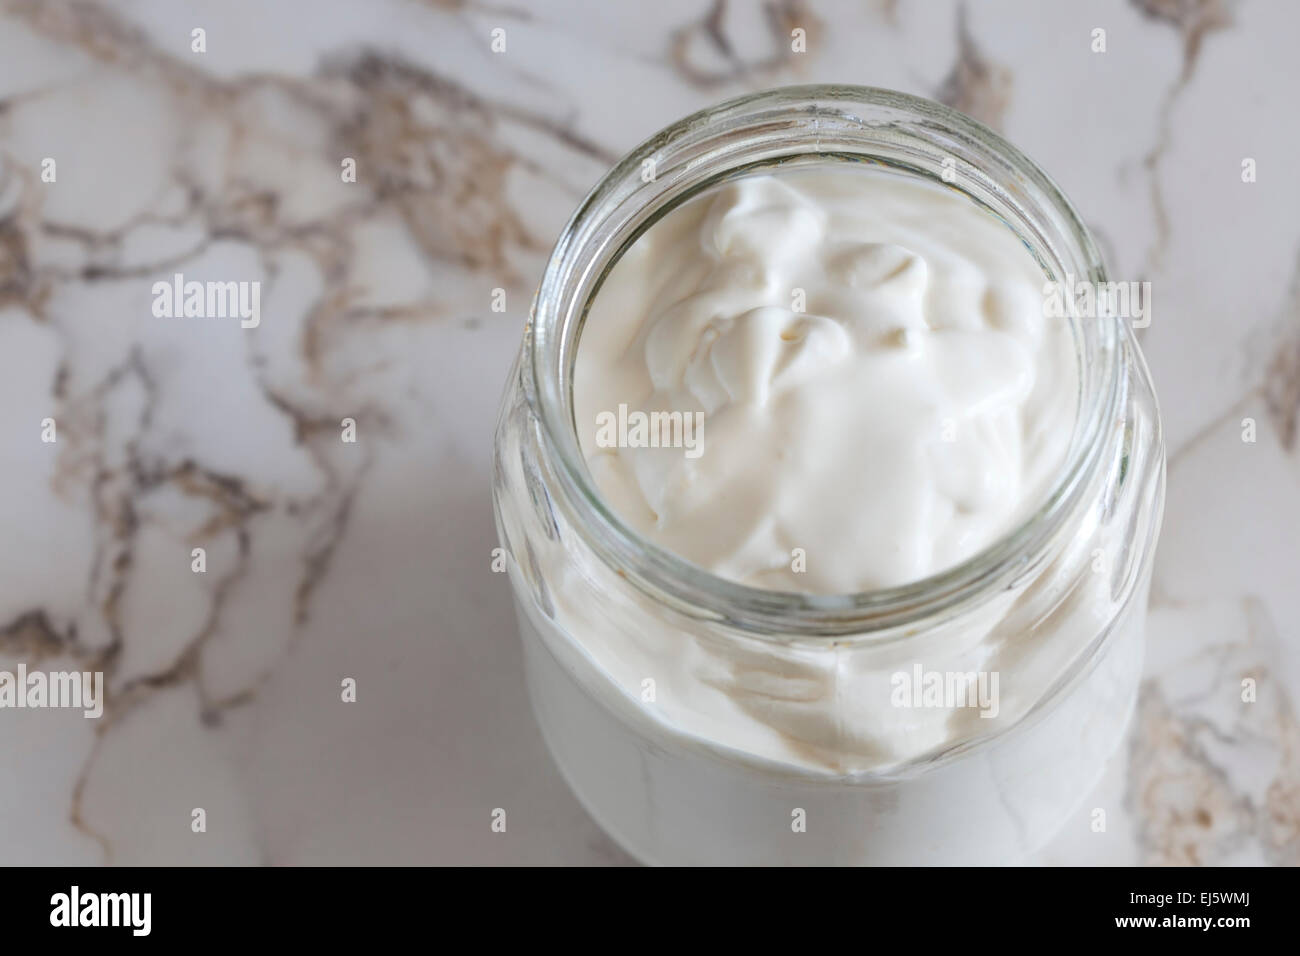 Close up of one jar with cream on kitchen table Stock Photo